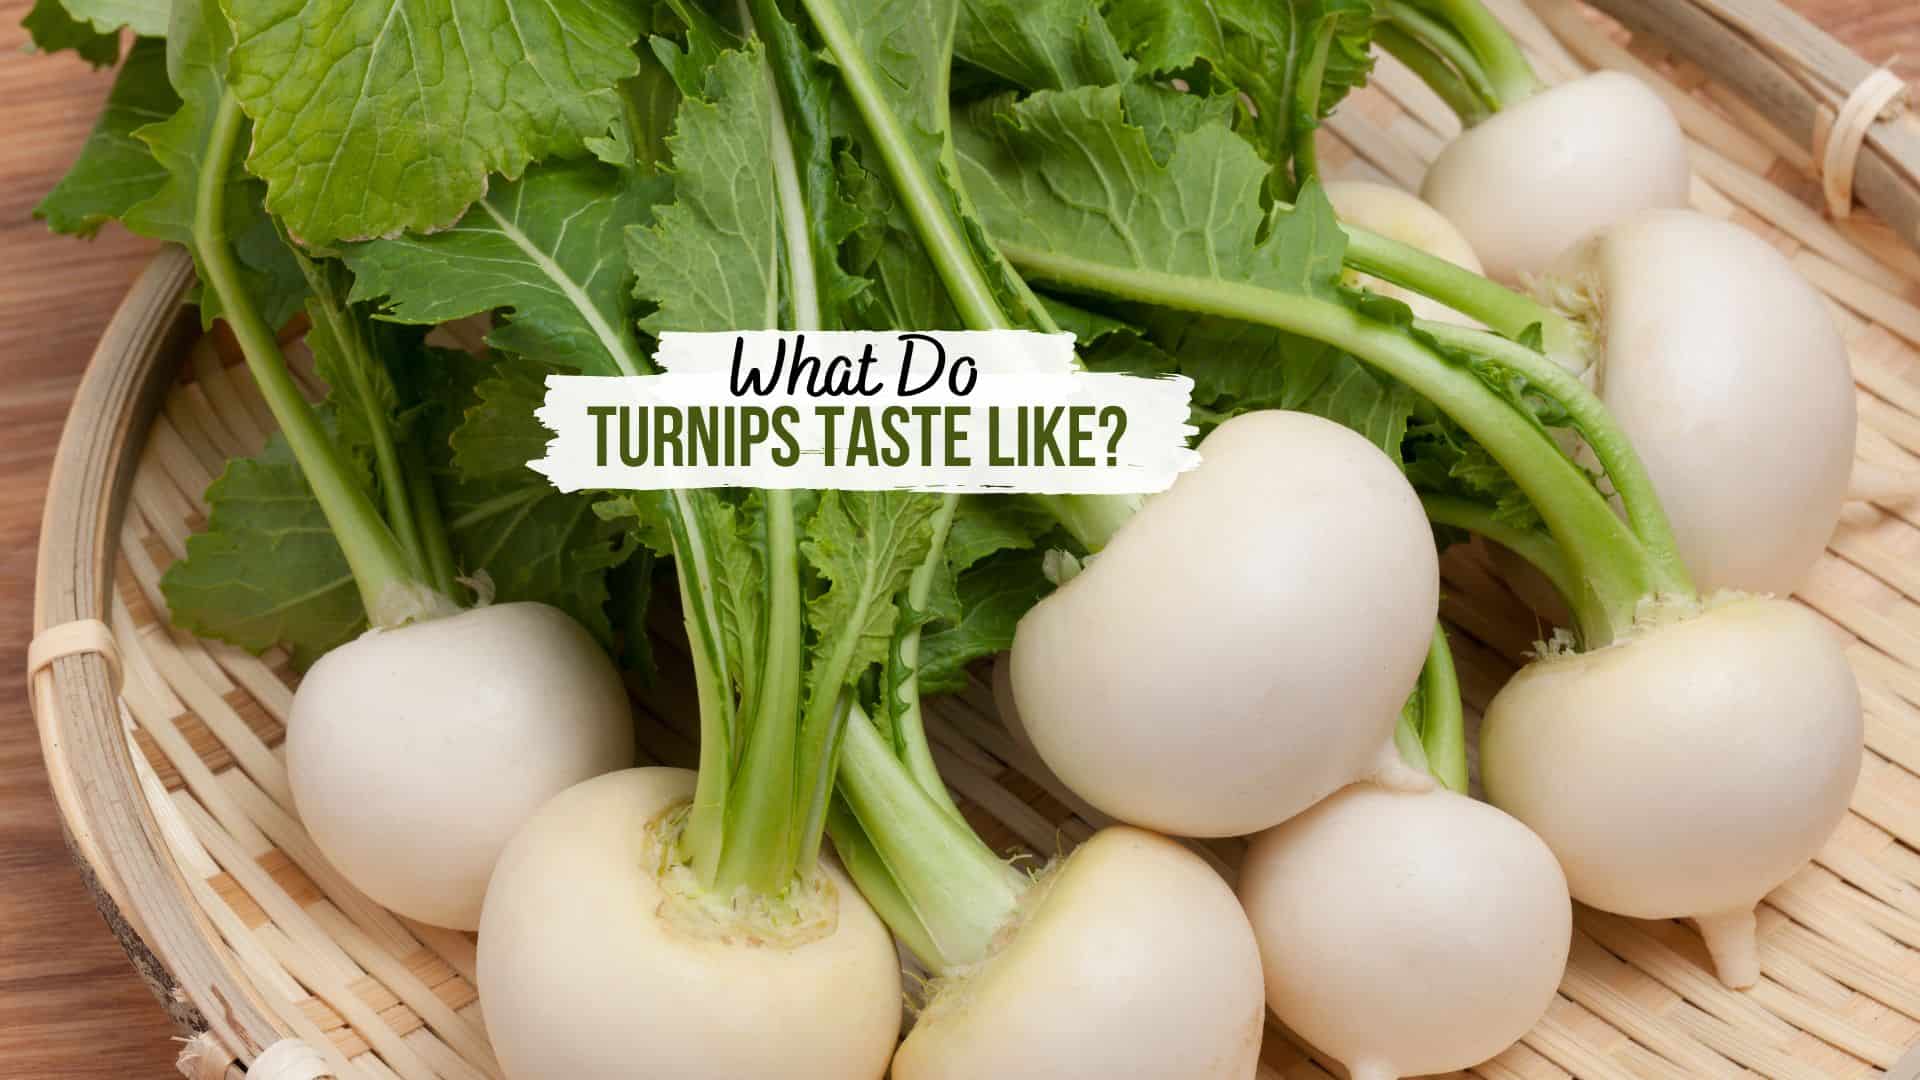 photo of turnips in a basket